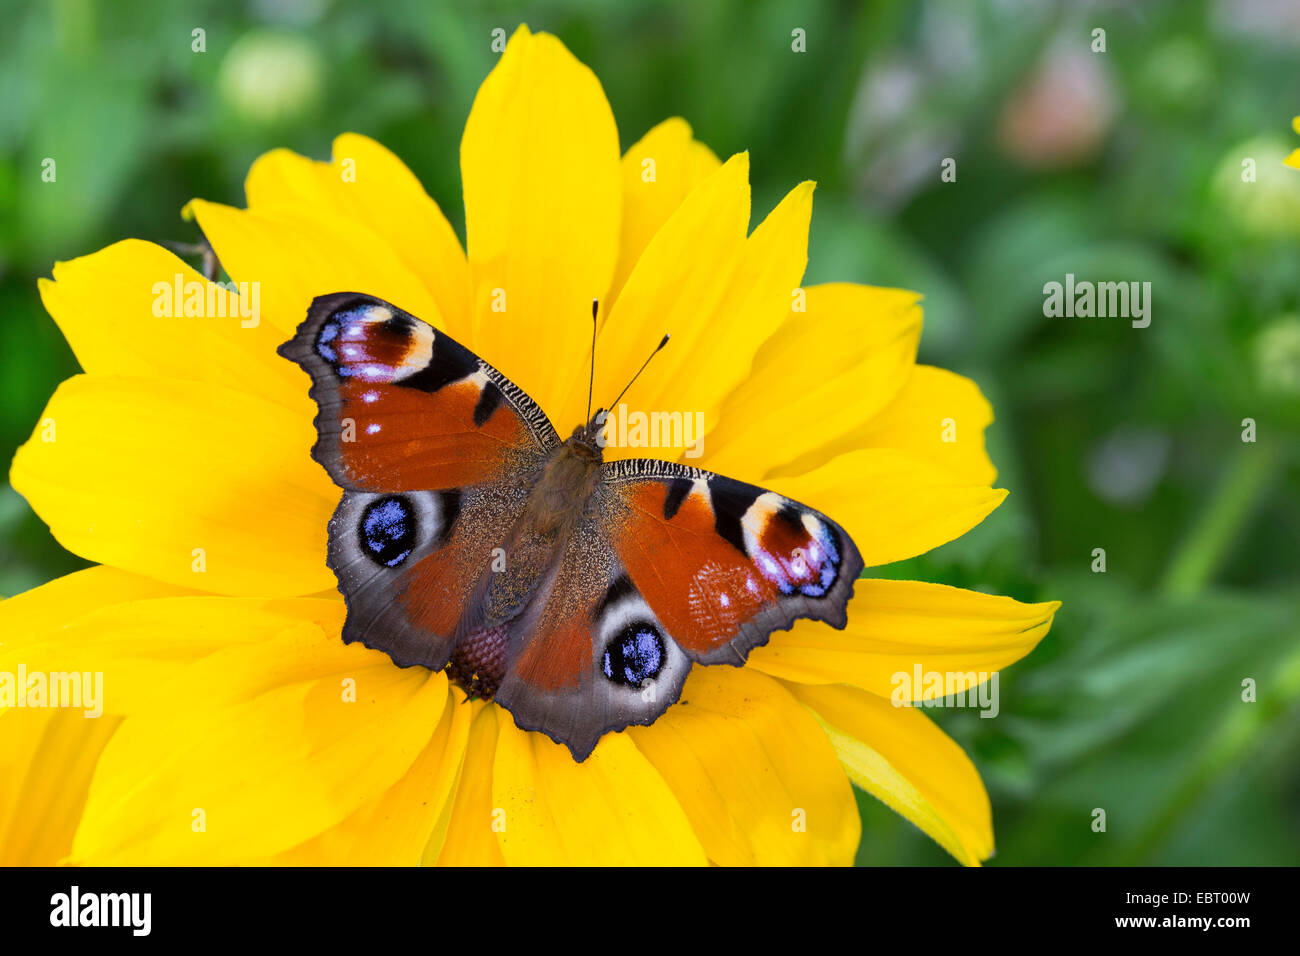 peacock moth, peacock (Inachis io, Nymphalis io), on a yellow blossom, Germany Stock Photo